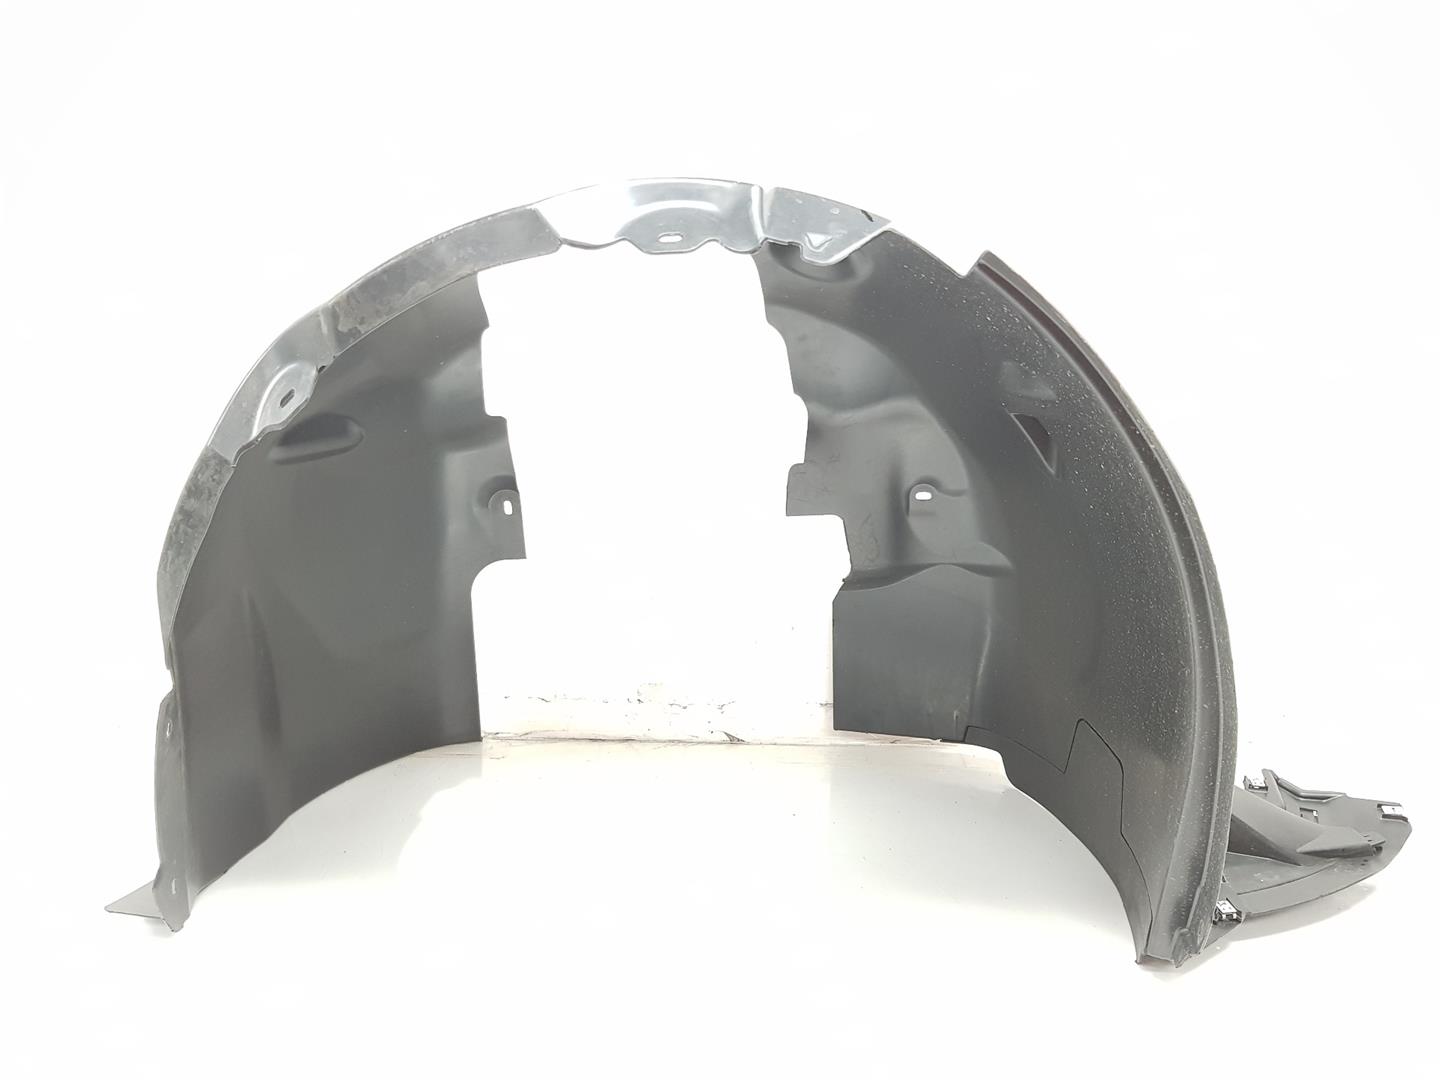 SEAT Alhambra 2 generation (2010-2021) Other Body Parts 6F0805912P, 6F0805912P 25101196